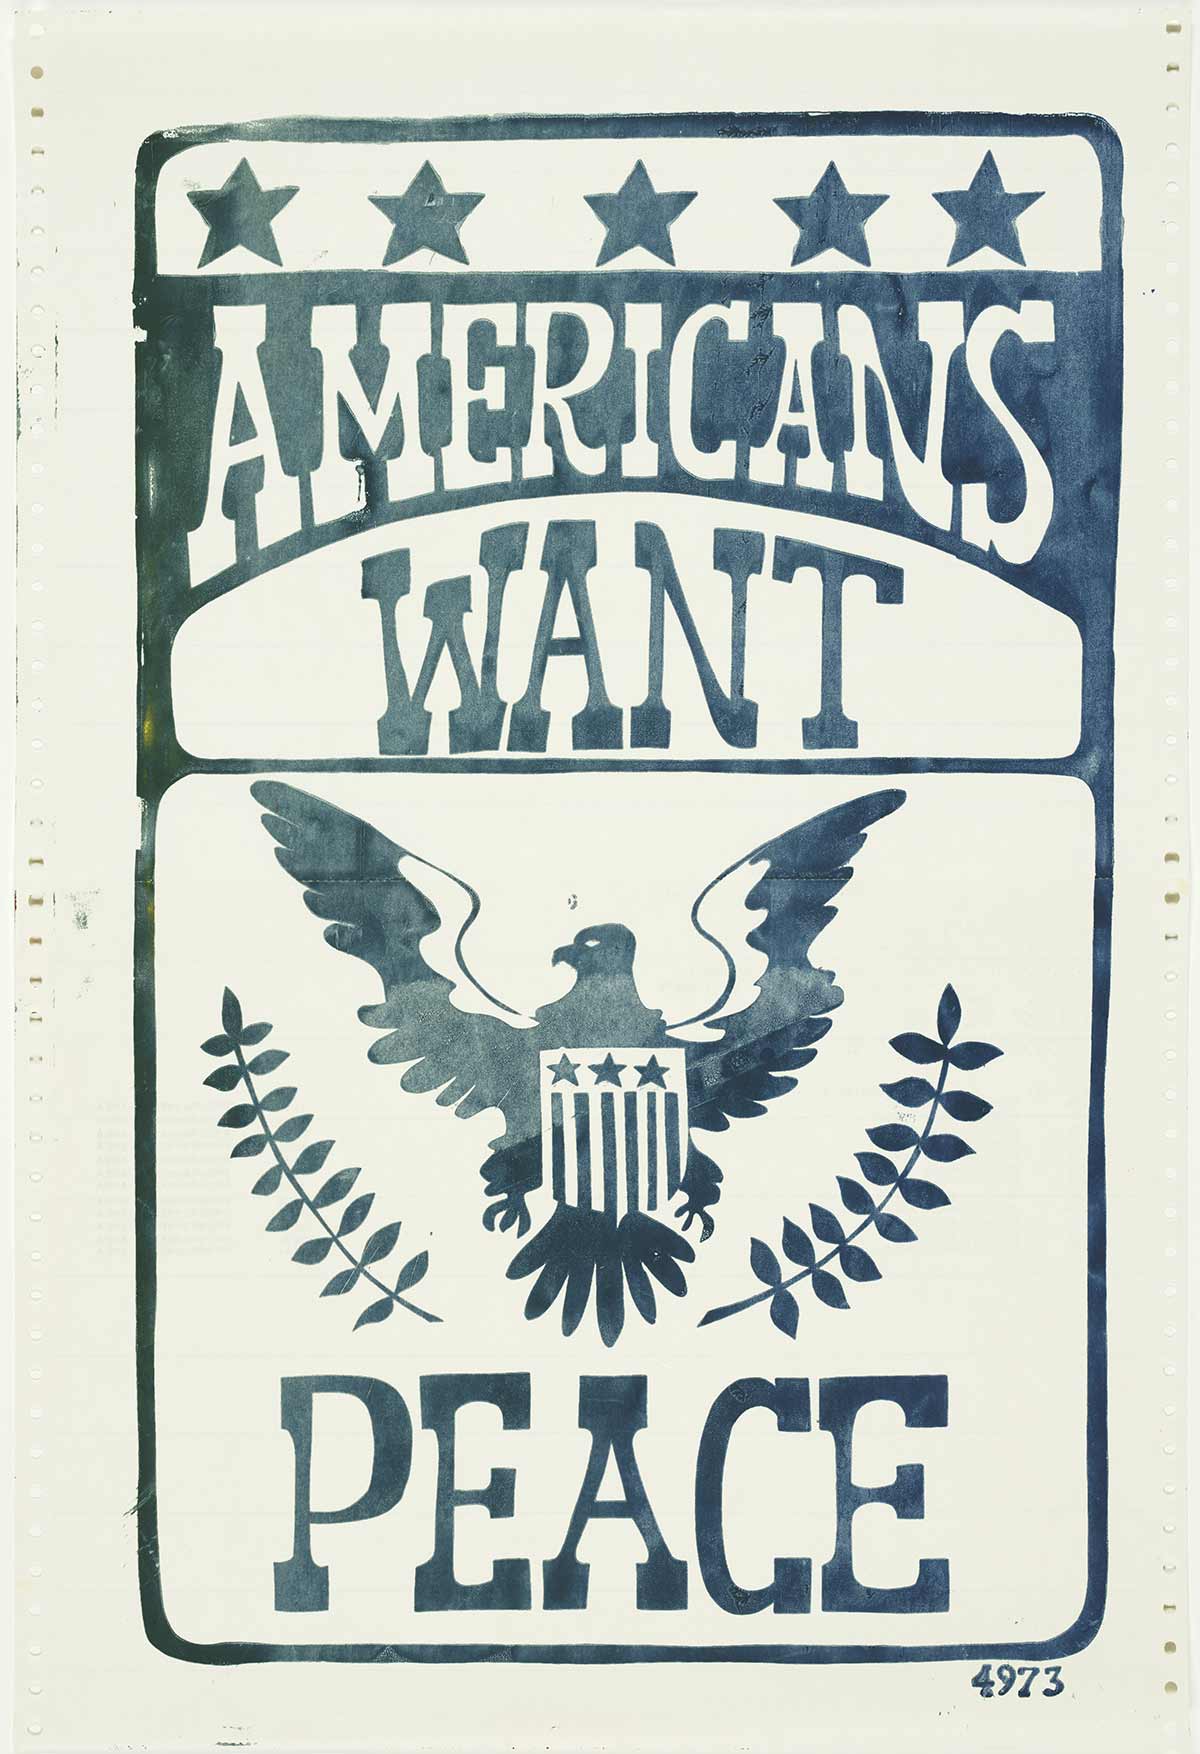 “Americans Want Peace” | 1970 | Thomas W. Benson papers, 1962-2012 (06352) | Historical Collections and Labor Archives, Eberly Family Special Collections Library, Penn State University Libraries